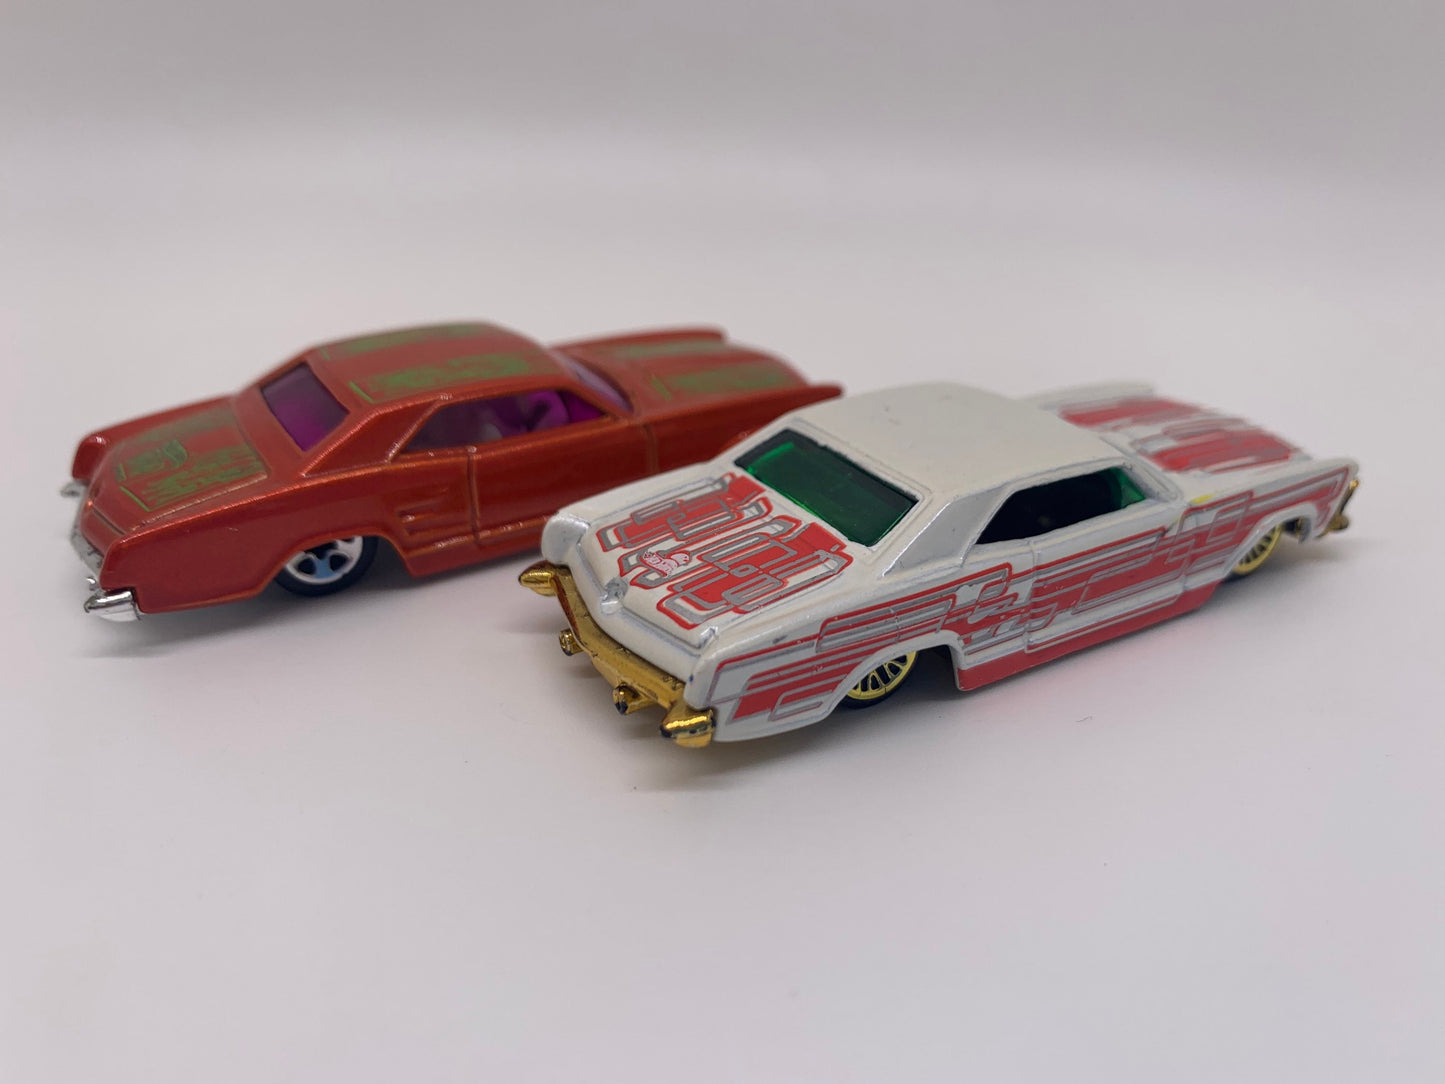 Hot Wheels ’64 Riviera Orange First Editions White Holiday Hot Rods Perfect Birthday Gift Miniature Collectible Scale Model Toy Car